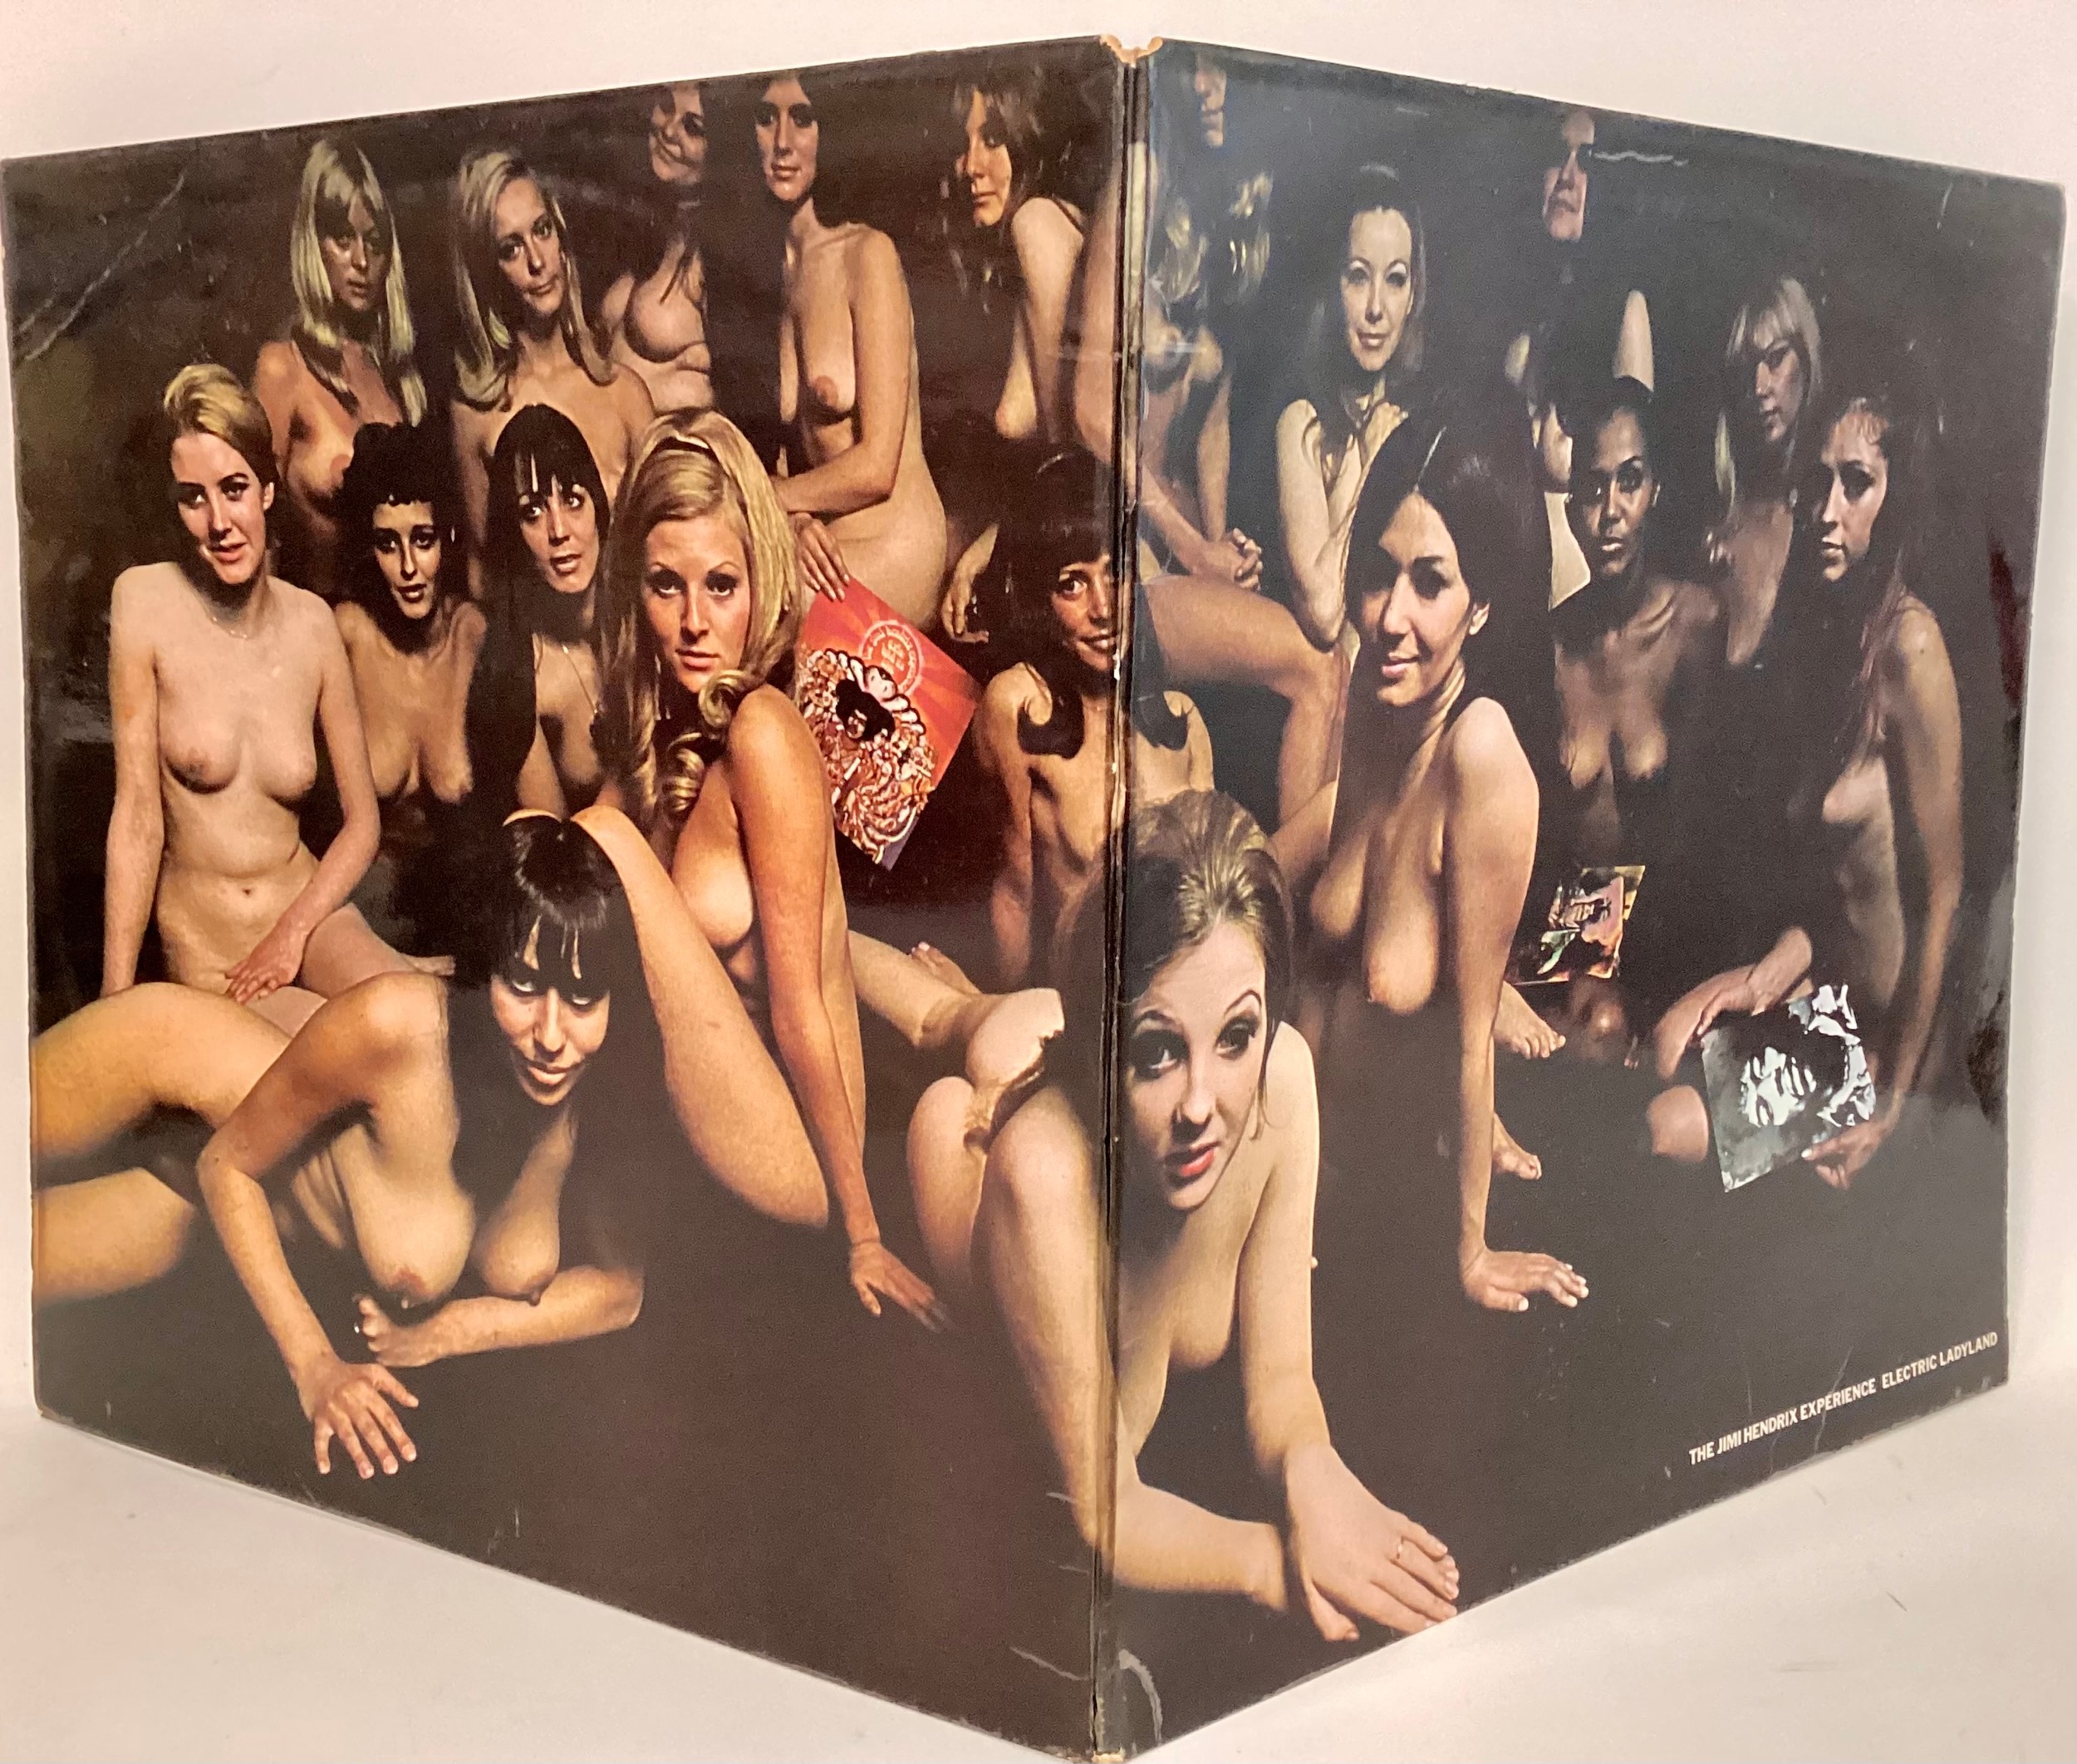 JIMI HENDRIX VINL LP RECORD ‘ELECTRIC LADYLAND’ WITH FULLY LAMINATED SLEEVE. Found here on The Track